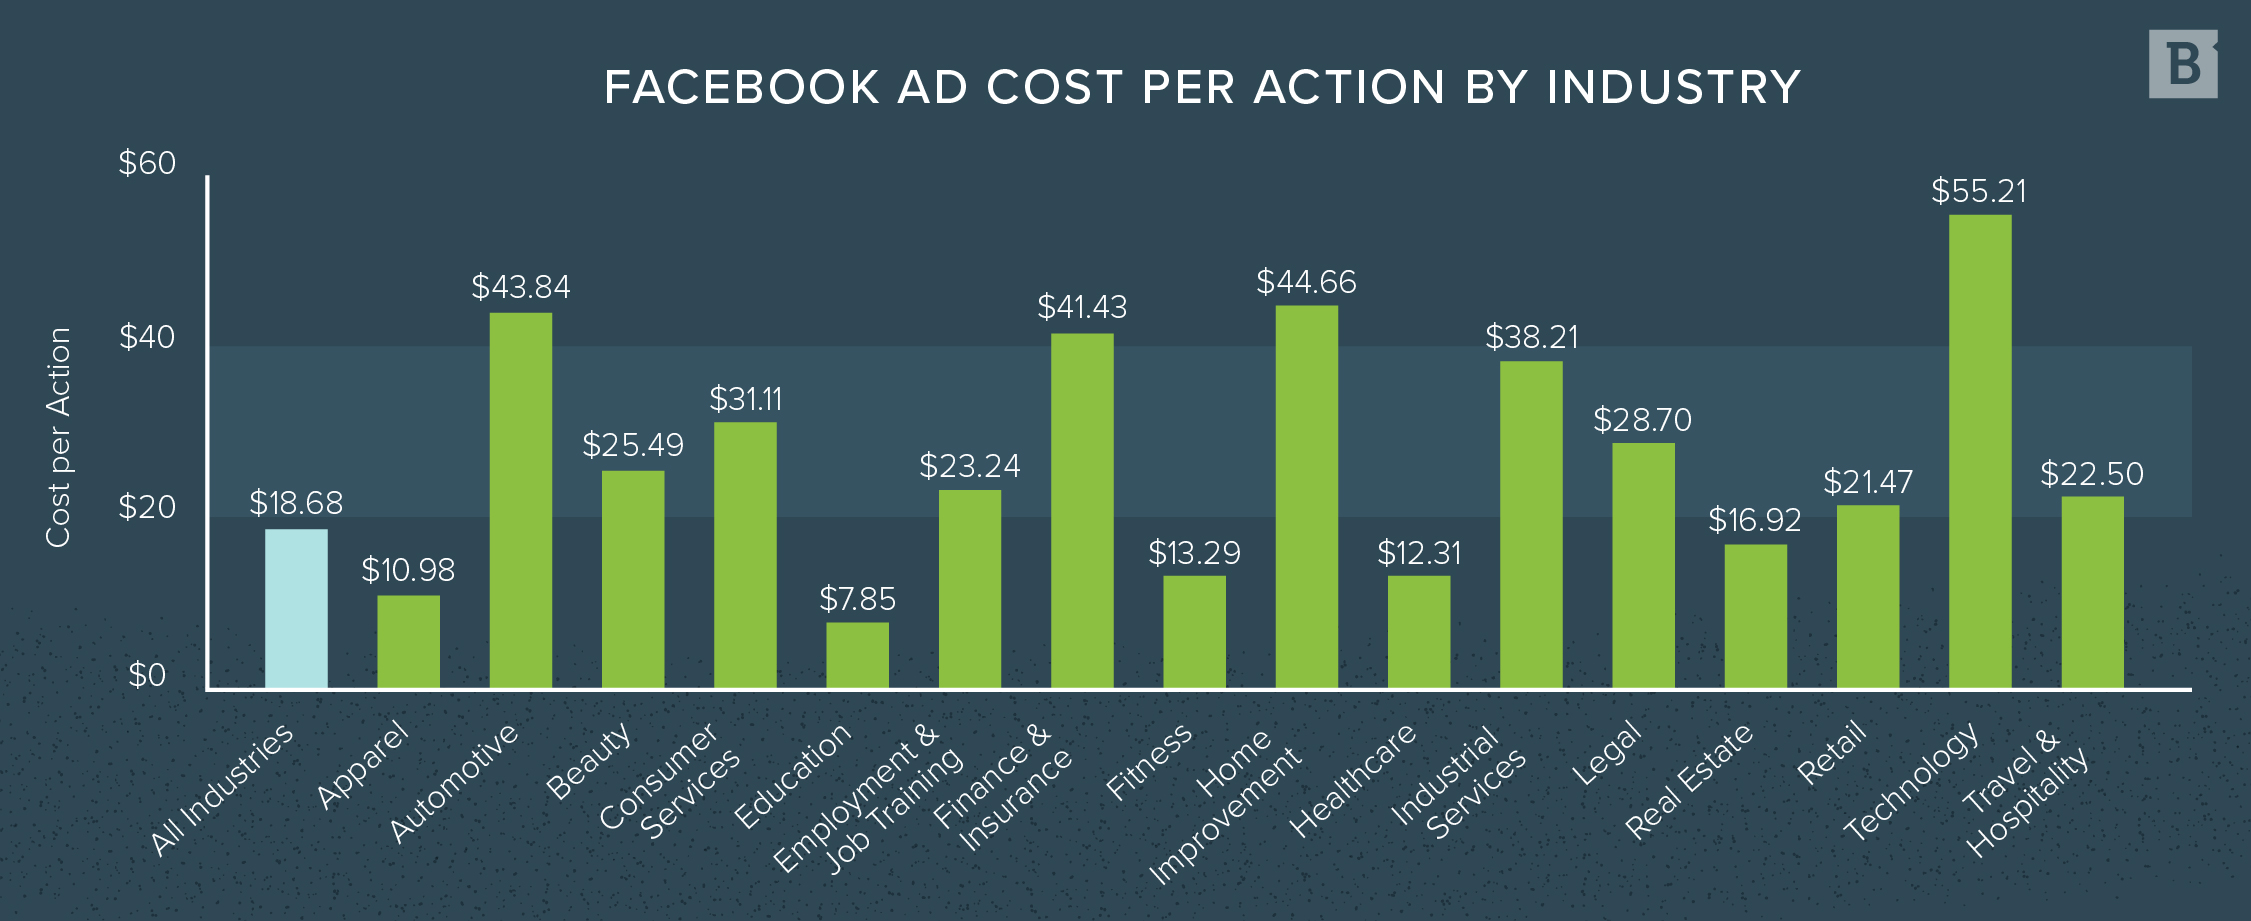 Facebook ad cost per action by industry